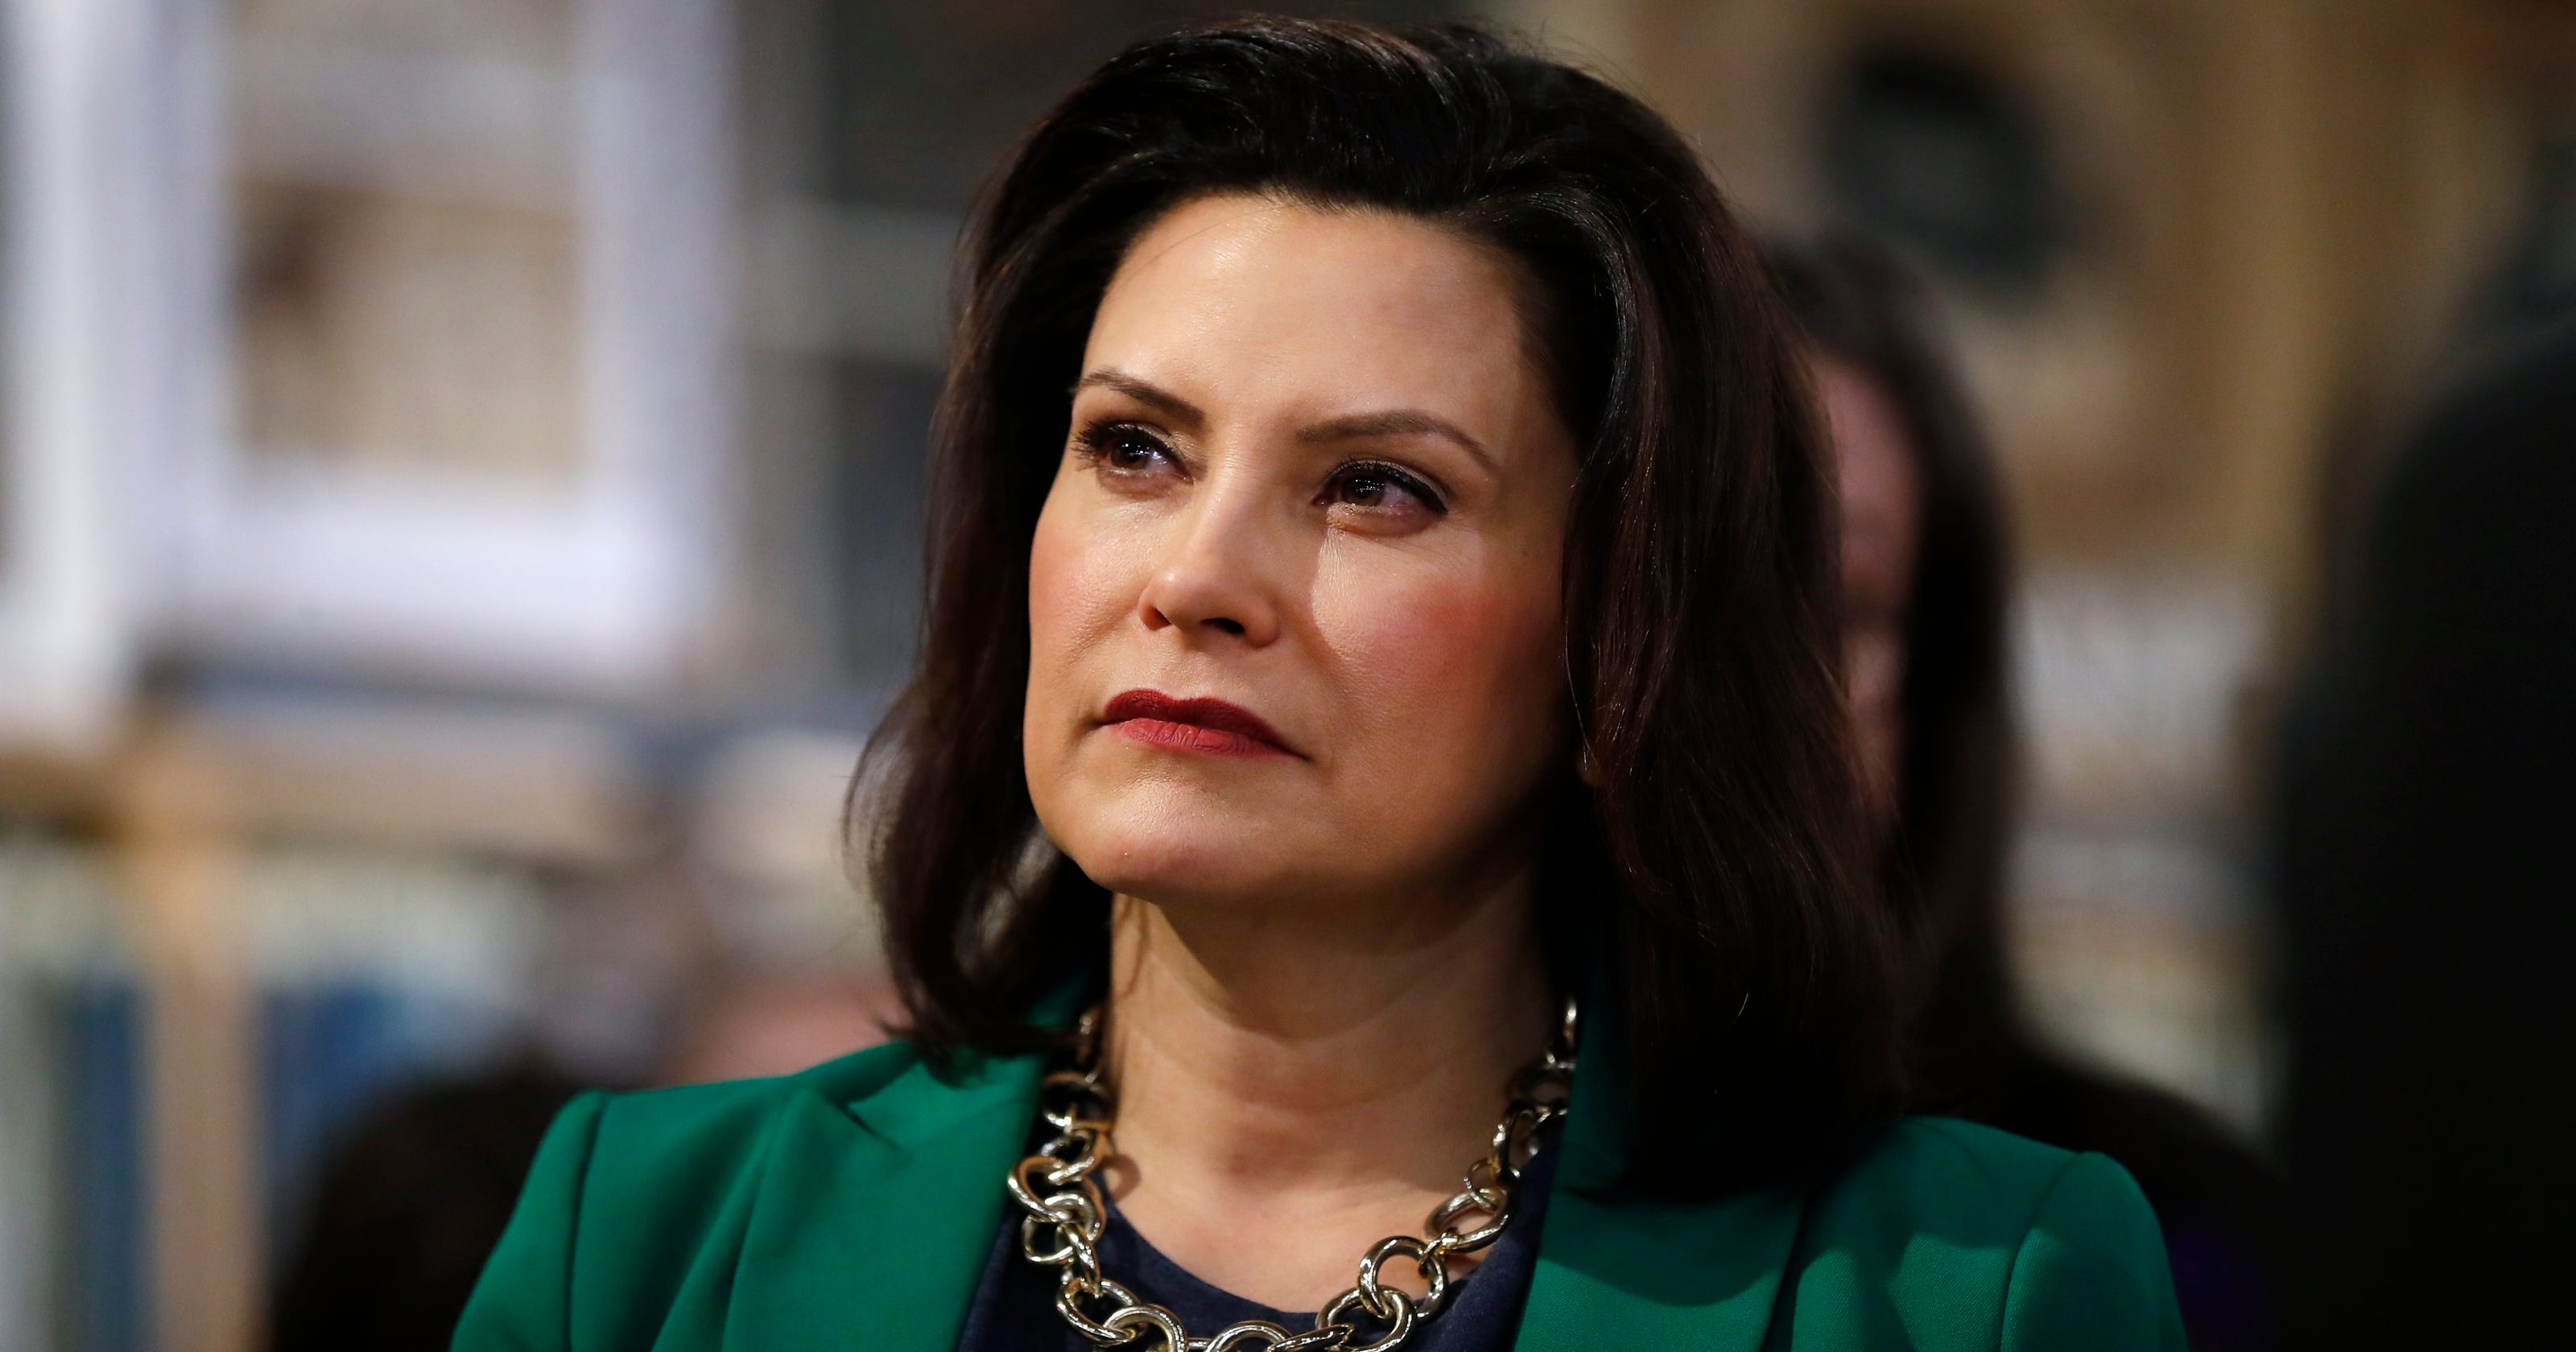 Gretchen Whitmer: 3 things to know about the Michigan Governor